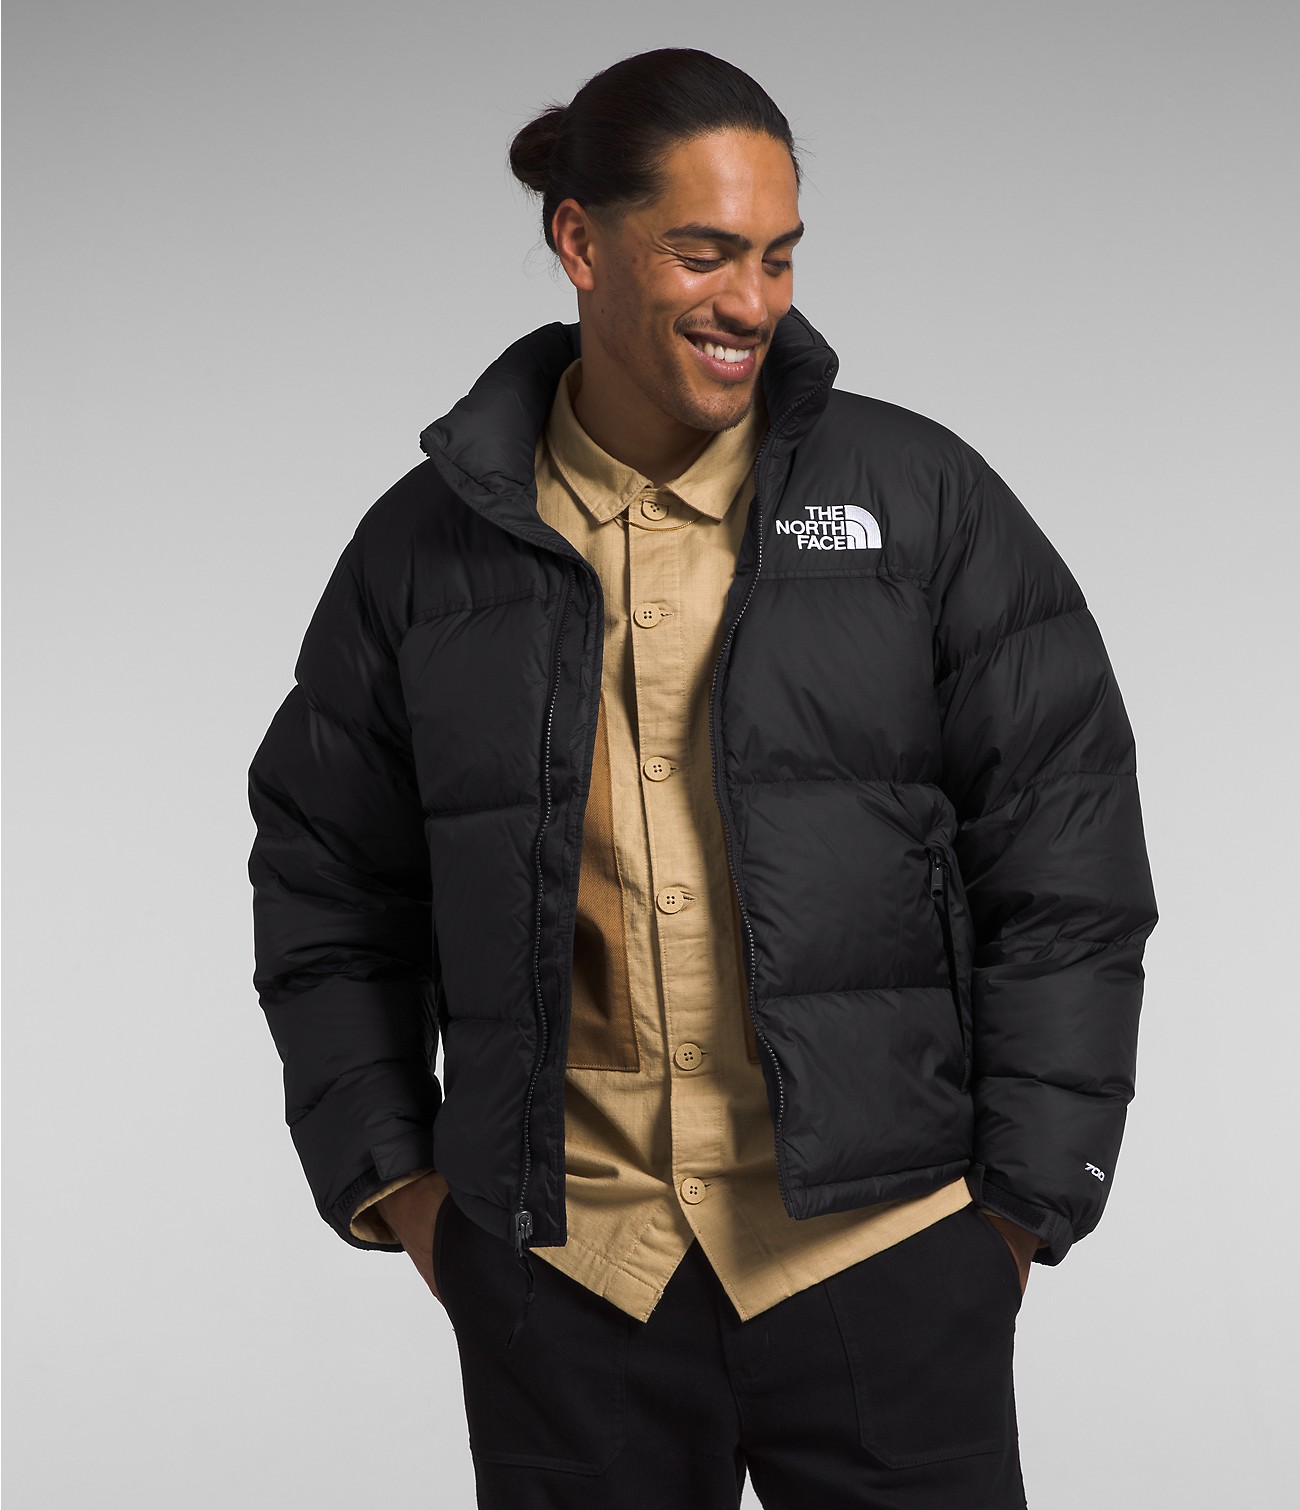 Unlock Wilderness' choice in the Rab Vs North Face comparison, the 1996 Retro Nuptse Jacket by The North Face